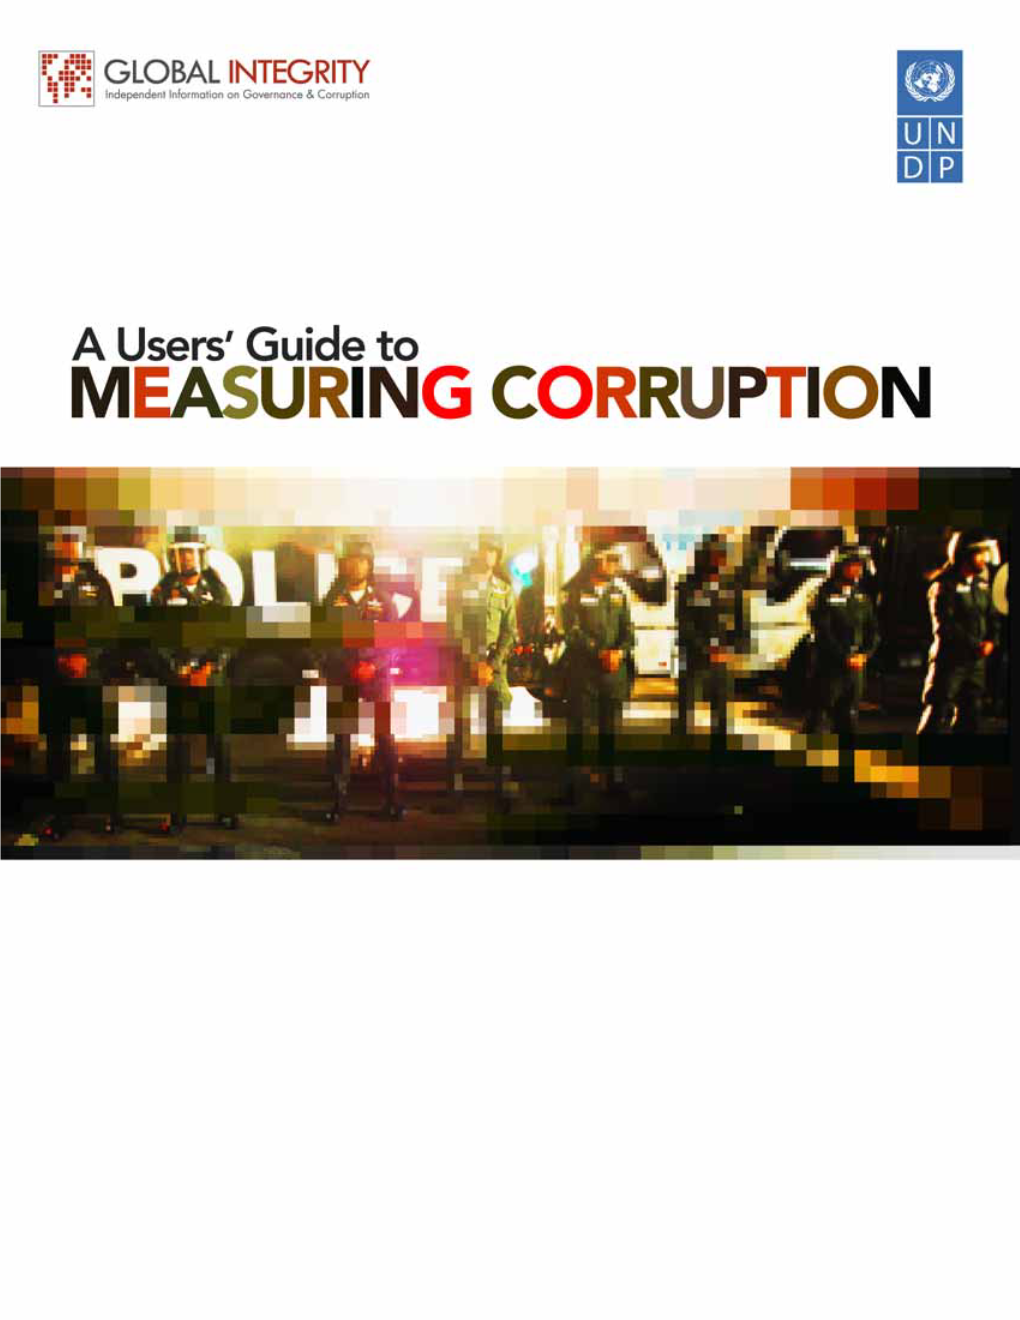 A Users' Guide to Measuring Corruption